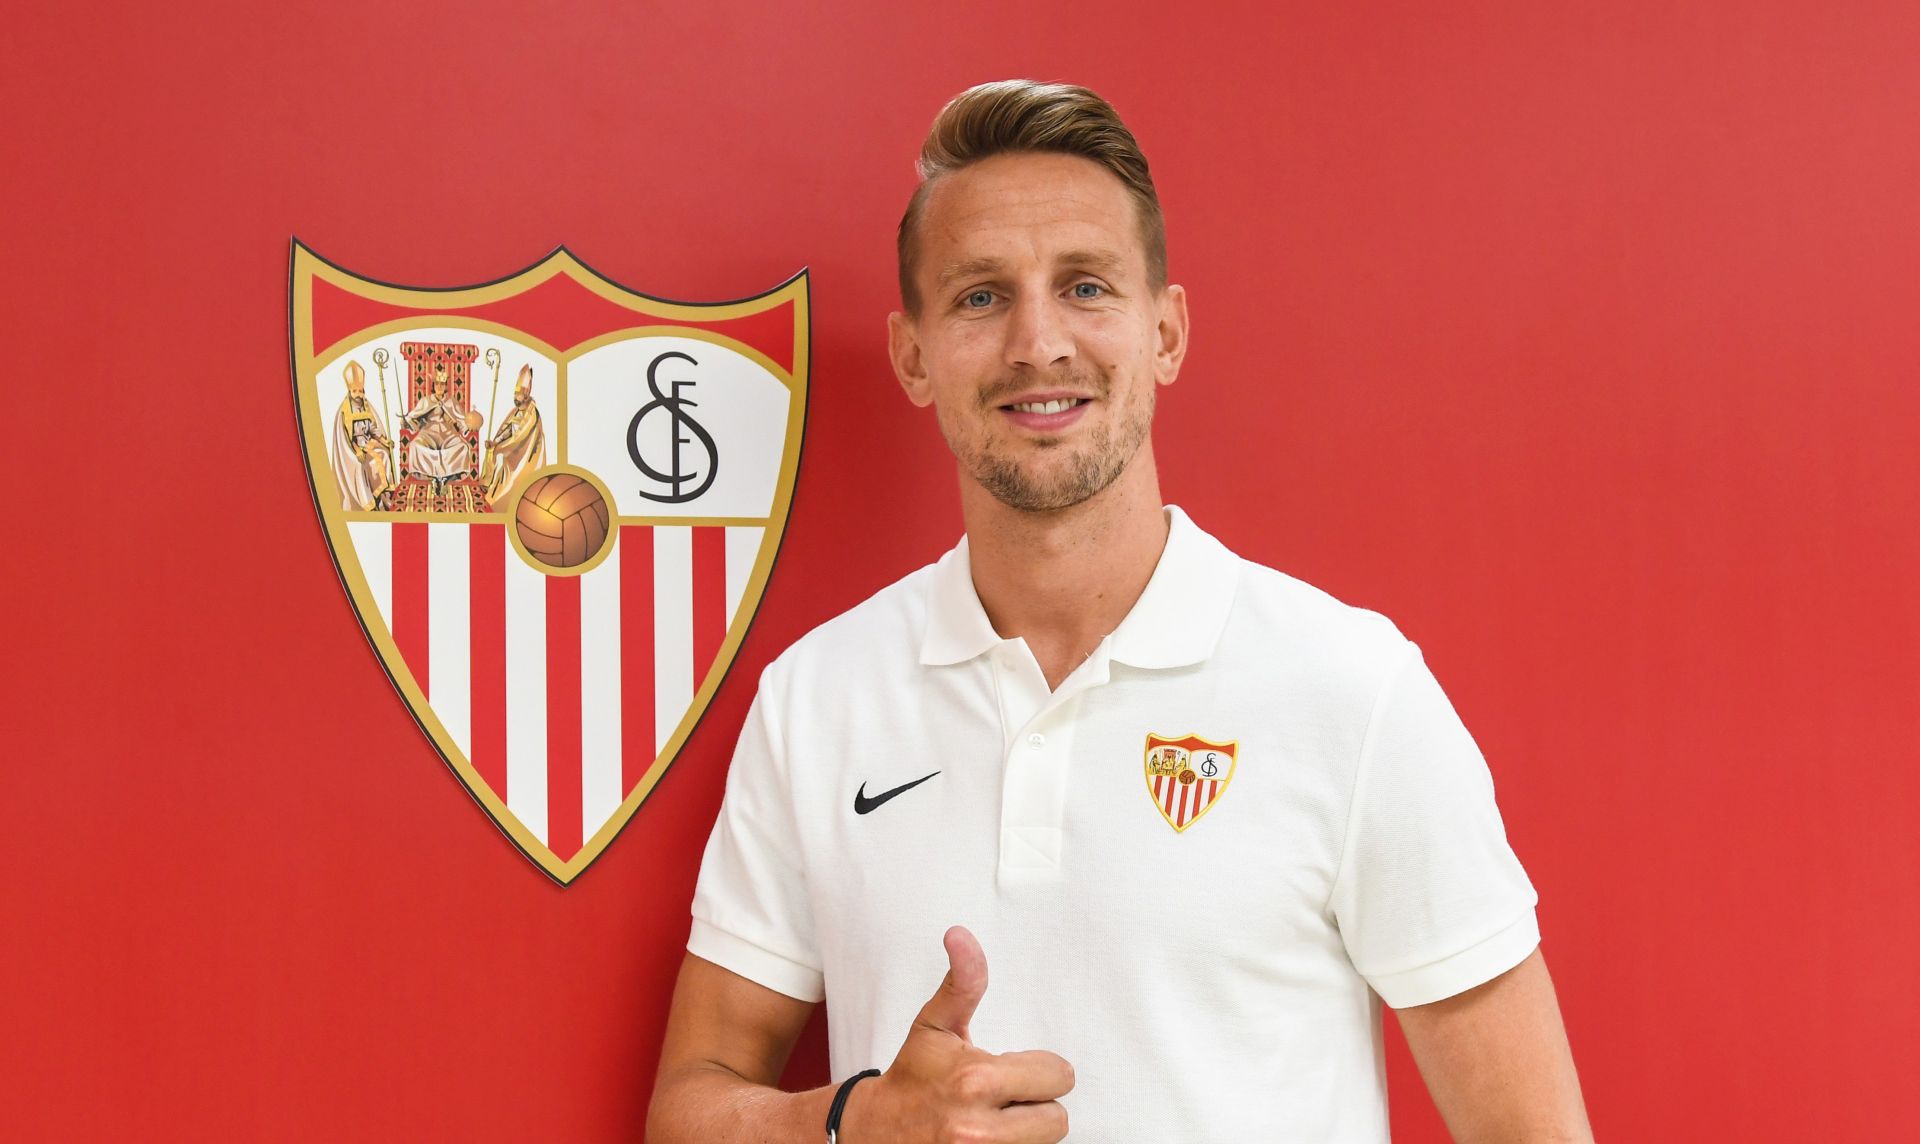 epa07688300 A handout photo made available by Spanish soccer club Sevilla FC shows Dutch striker Luuk de Jong posing during his presentation as new player in Seville, southern Spain, 01 July 2019. De Jong has signed a contract until 2023.  EPA/PEPE CARRION/ SEVILLA FC  HANDOUT EDITORIAL USE ONLY/NO SALES